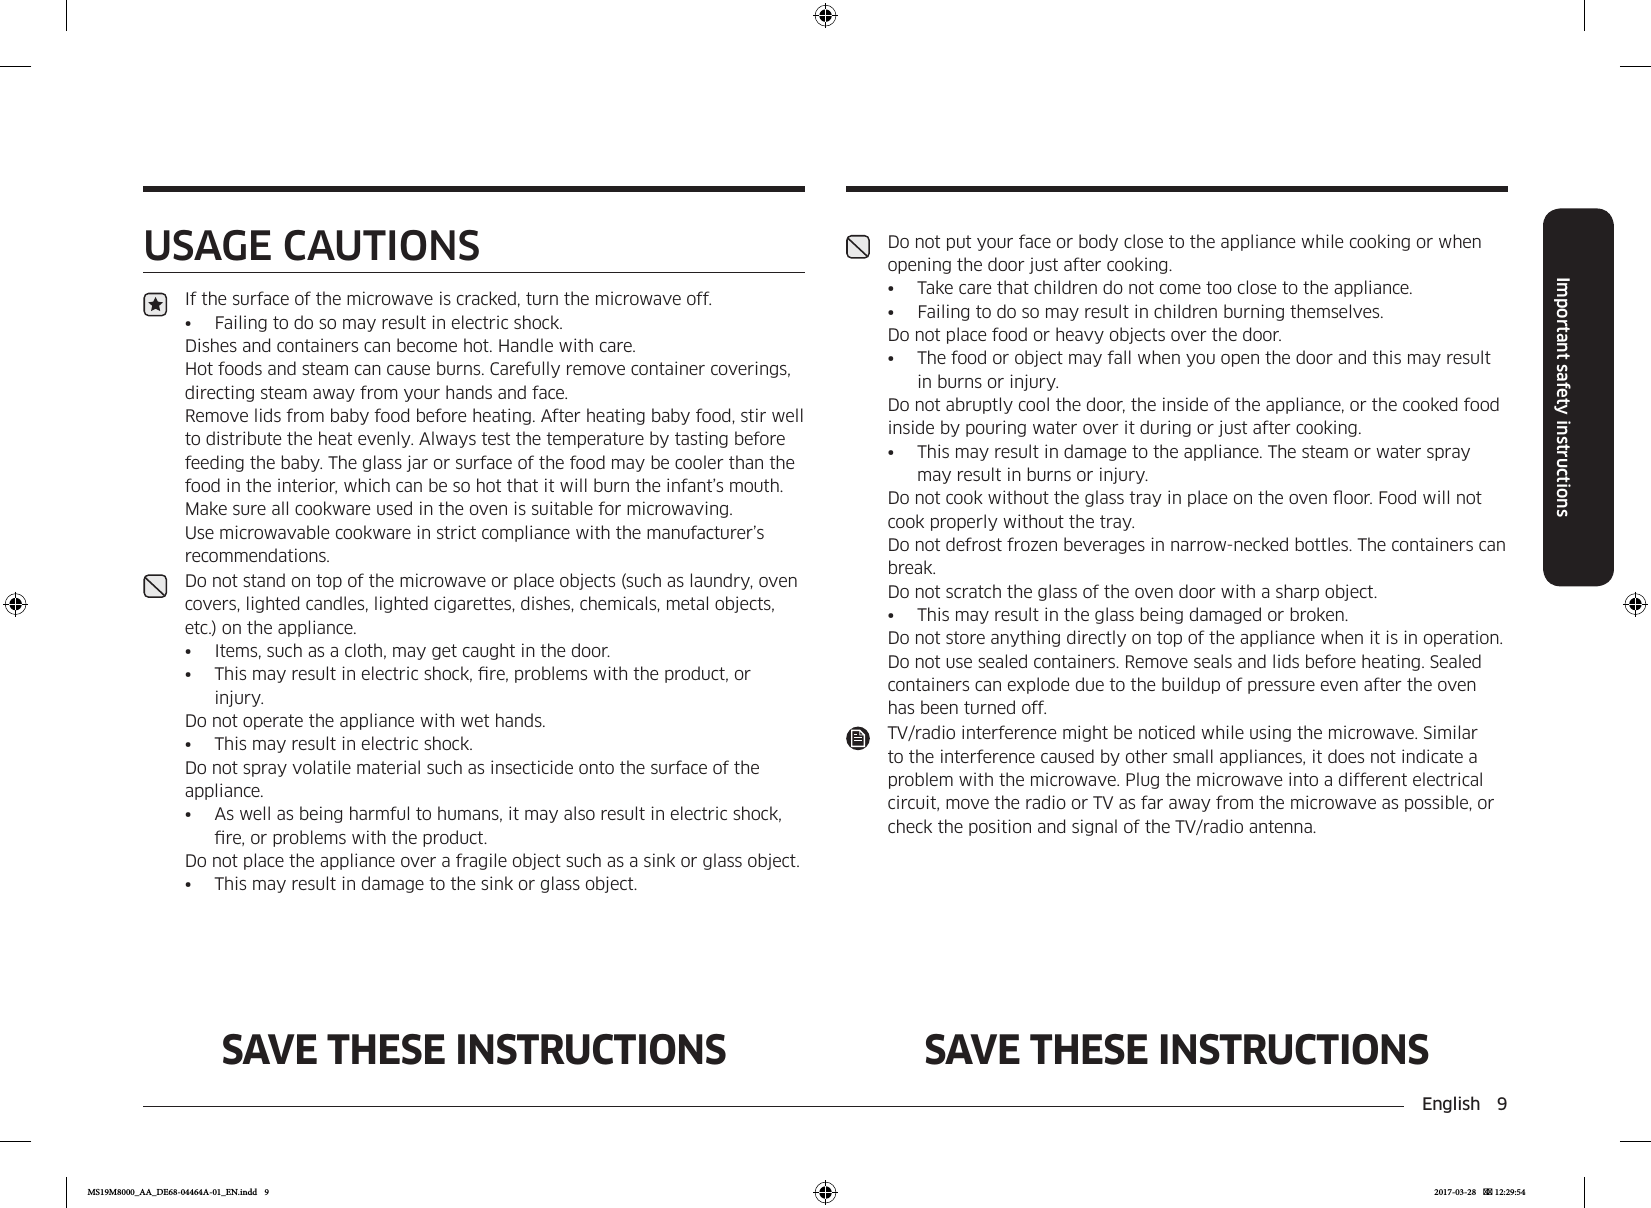 English  9Important safety instructionsSAVE THESE INSTRUCTIONS SAVE THESE INSTRUCTIONSUSAGE CAUTIONSIf the surface of the microwave is cracked, turn the microwave off.•  Failing to do so may result in electric shock.Dishes and containers can become hot. Handle with care. Hot foods and steam can cause burns. Carefully remove container coverings, directing steam away from your hands and face.Remove lids from baby food before heating. After heating baby food, stir well to distribute the heat evenly. Always test the temperature by tasting before feeding the baby. The glass jar or surface of the food may be cooler than the food in the interior, which can be so hot that it will burn the infant’s mouth.Make sure all cookware used in the oven is suitable for microwaving.Use microwavable cookware in strict compliance with the manufacturer’s recommendations.Do not stand on top of the microwave or place objects (such as laundry, oven covers, lighted candles, lighted cigarettes, dishes, chemicals, metal objects, etc.) on the appliance.•  Items, such as a cloth, may get caught in the door.•  This may result in electric shock, re, problems with the product, or injury.Do not operate the appliance with wet hands.•  This may result in electric shock. Do not spray volatile material such as insecticide onto the surface of the appliance.•  As well as being harmful to humans, it may also result in electric shock, re, or problems with the product. Do not place the appliance over a fragile object such as a sink or glass object. •  This may result in damage to the sink or glass object.Do not put your face or body close to the appliance while cooking or when opening the door just after cooking.•  Take care that children do not come too close to the appliance.•  Failing to do so may result in children burning themselves.Do not place food or heavy objects over the door.•  The food or object may fall when you open the door and this may result in burns or injury. Do not abruptly cool the door, the inside of the appliance, or the cooked food inside by pouring water over it during or just after cooking.•  This may result in damage to the appliance. The steam or water spray may result in burns or injury.Do not cook without the glass tray in place on the oven oor. Food will not cook properly without the tray.Do not defrost frozen beverages in narrow-necked bottles. The containers can break.Do not scratch the glass of the oven door with a sharp object.•  This may result in the glass being damaged or broken.Do not store anything directly on top of the appliance when it is in operation.Do not use sealed containers. Remove seals and lids before heating. Sealed containers can explode due to the buildup of pressure even after the oven has been turned off.TV/radio interference might be noticed while using the microwave. Similar to the interference caused by other small appliances, it does not indicate a problem with the microwave. Plug the microwave into a different electrical circuit, move the radio or TV as far away from the microwave as possible, or check the position and signal of the TV/radio antenna.MS19M8000_AA_DE68-04464A-01_EN.indd   9 2017-03-28    12:29:54